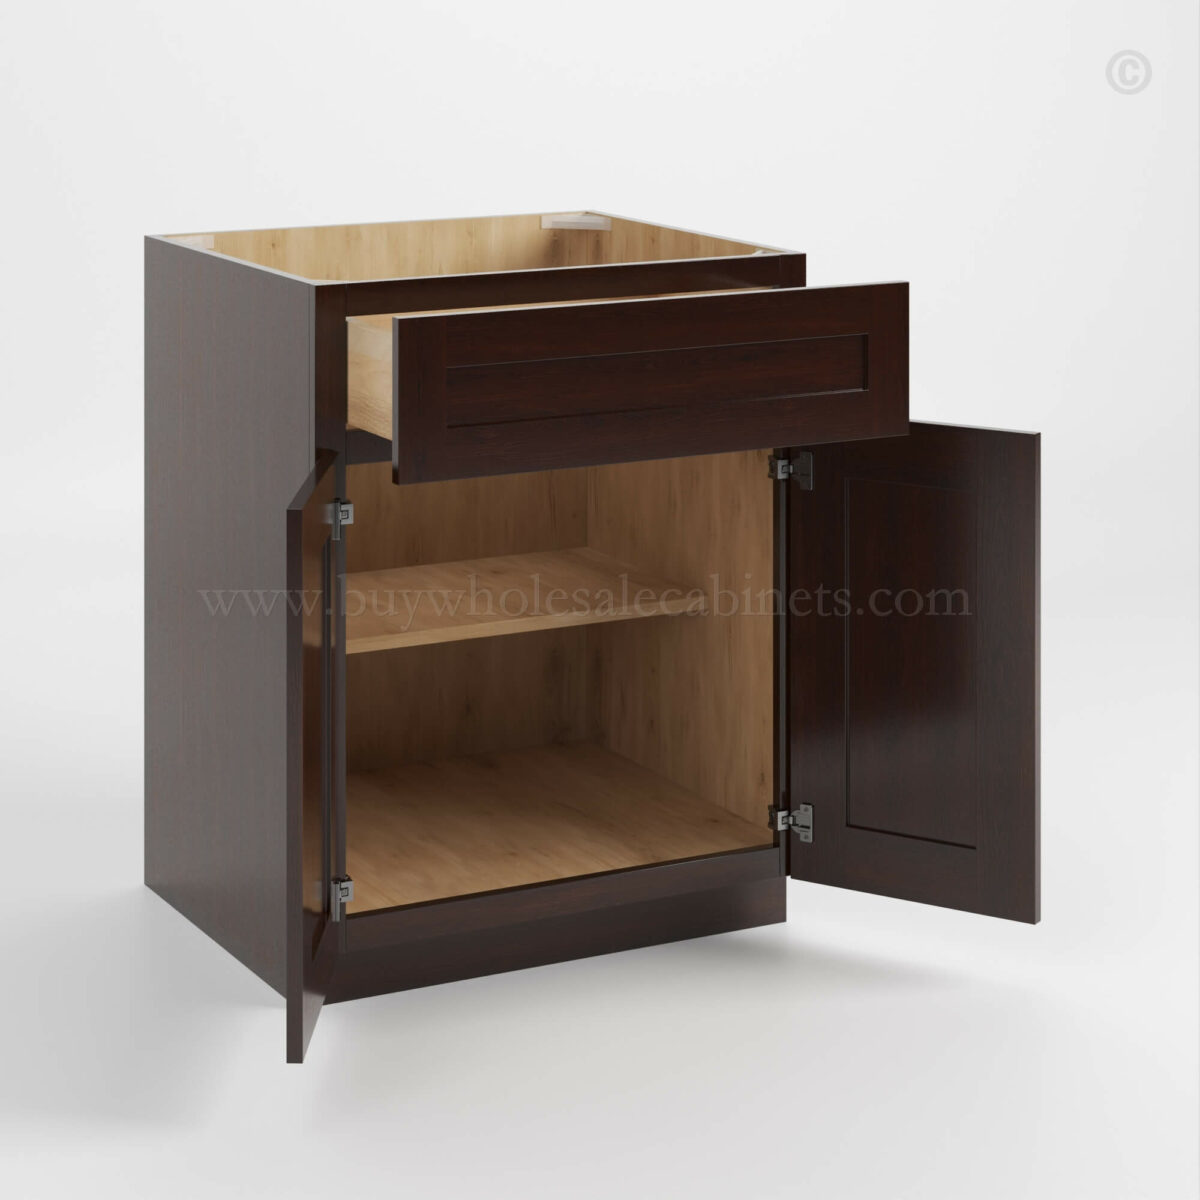 Shaker Espresso Base Cabinet with Double Doors & Single Drawer image 1